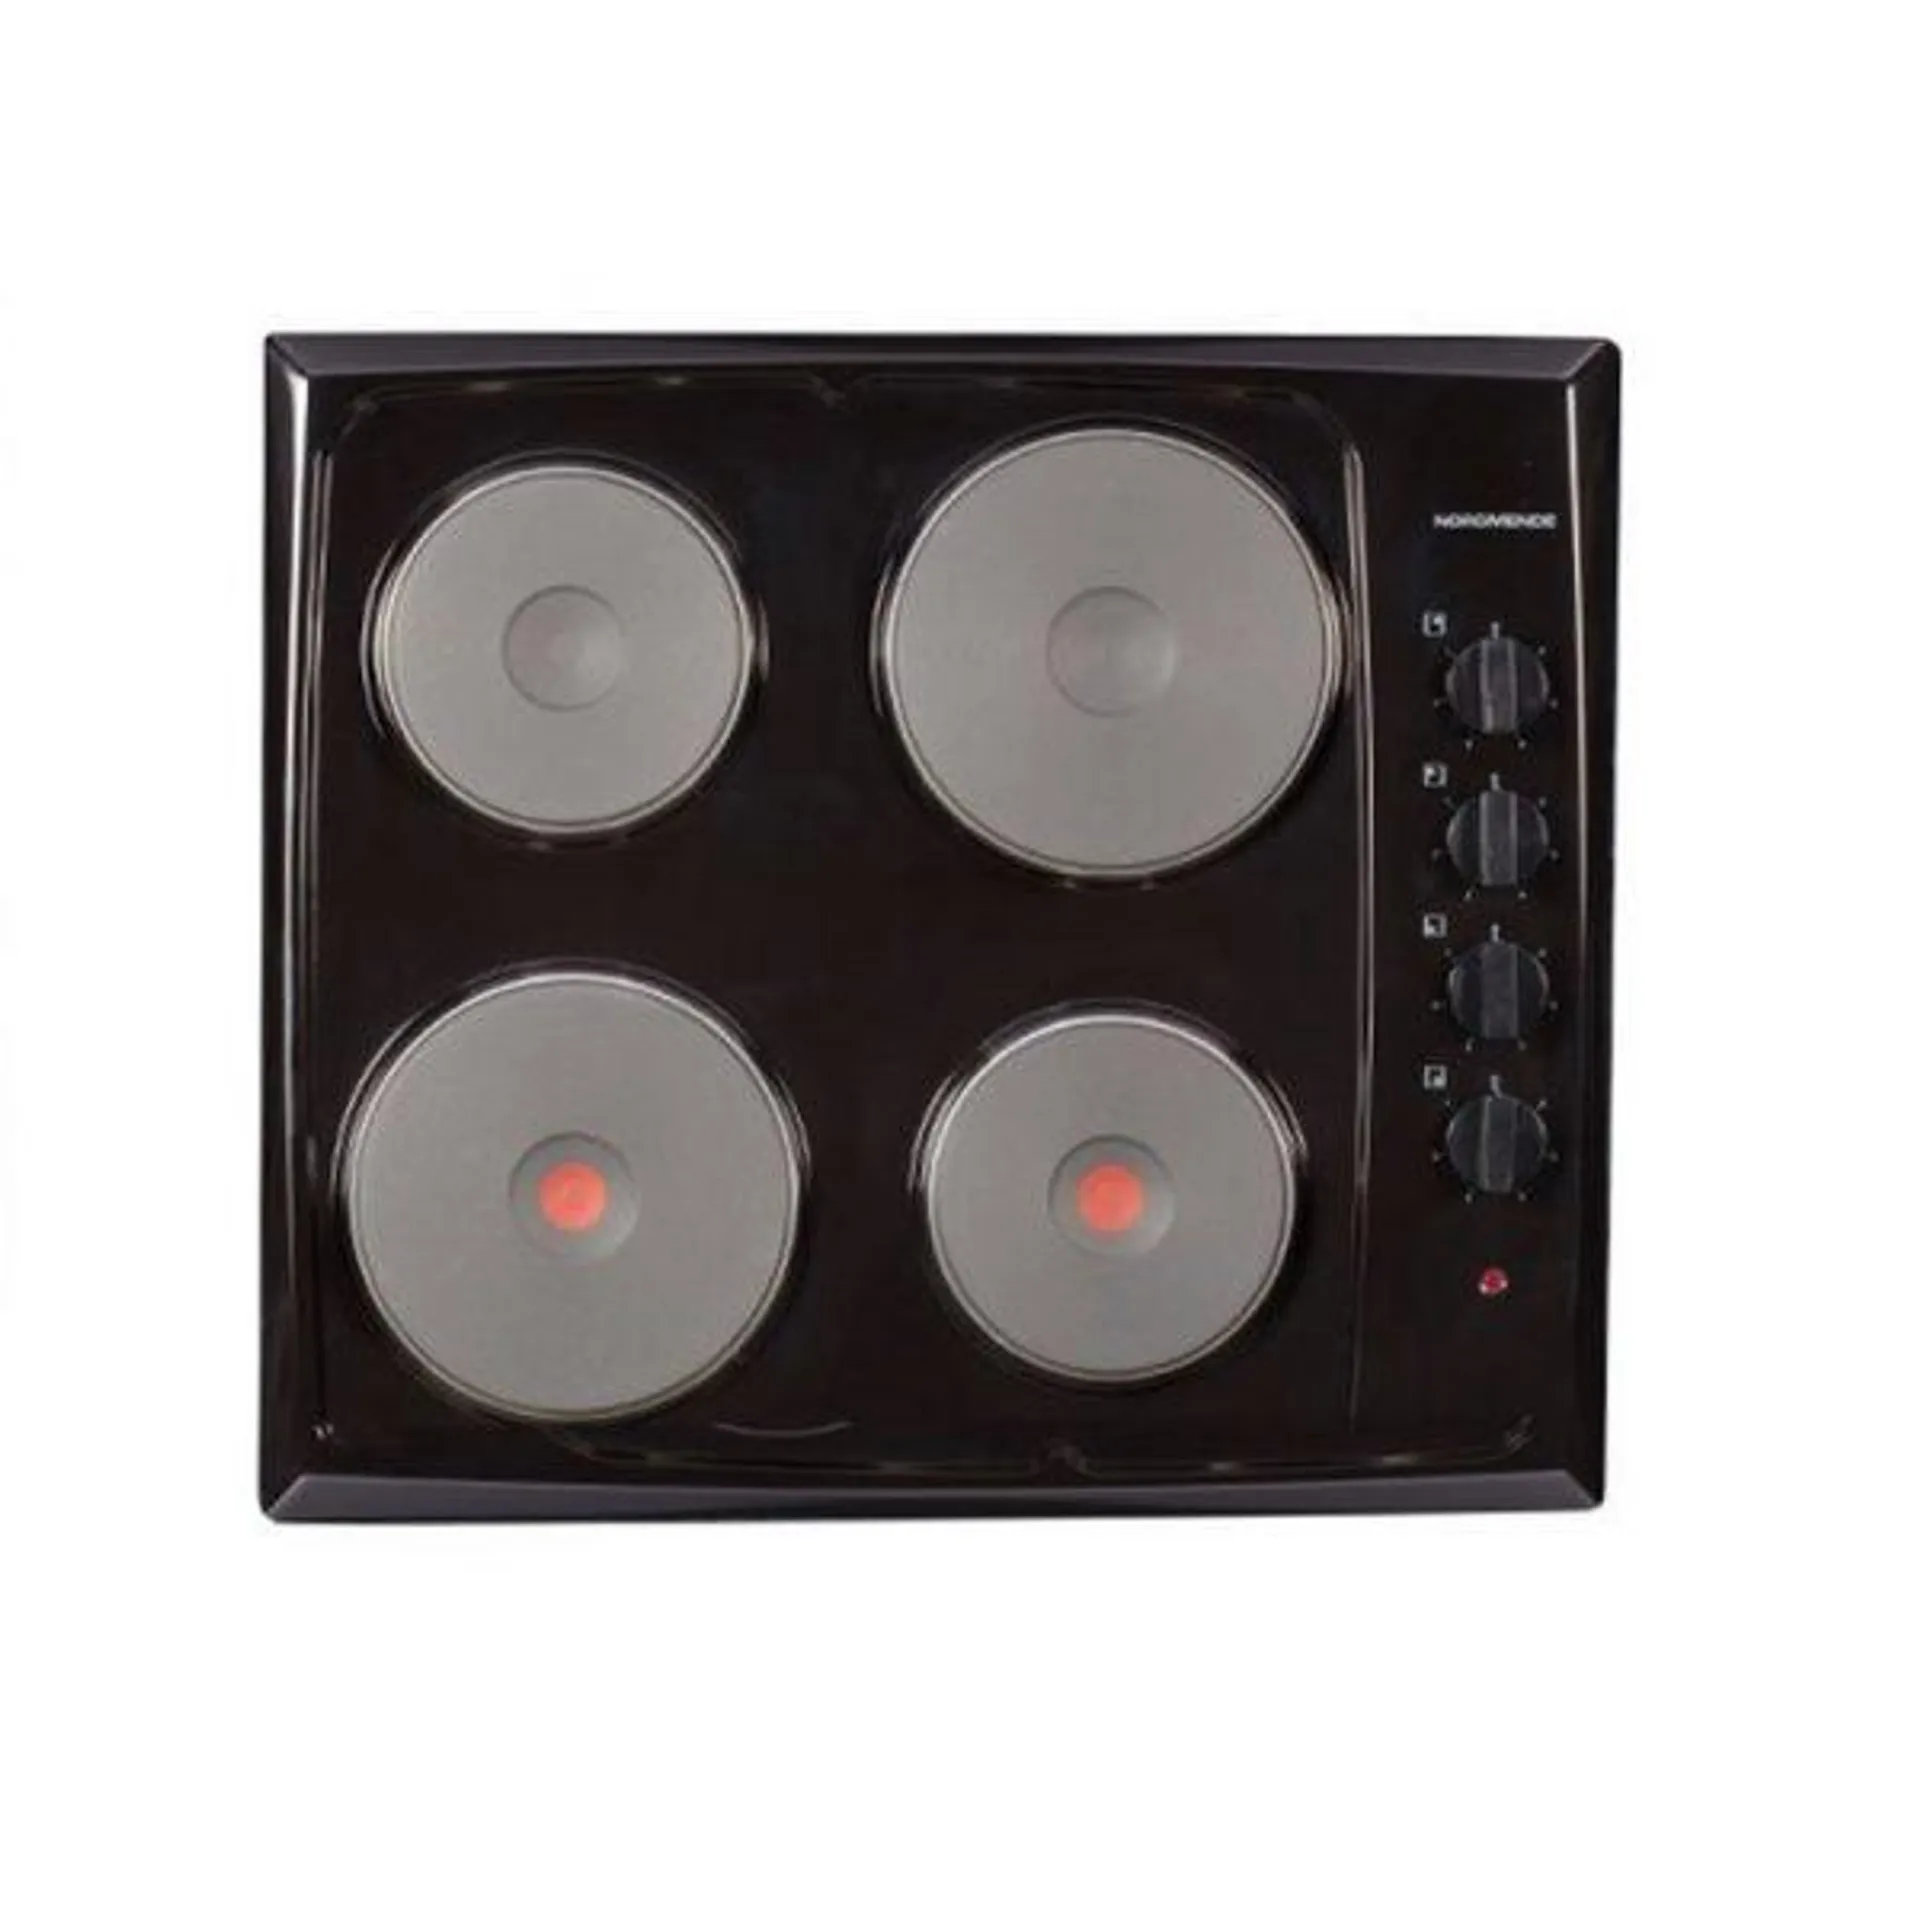 Nordmende 4 Zone Solid Plate Electric Hob